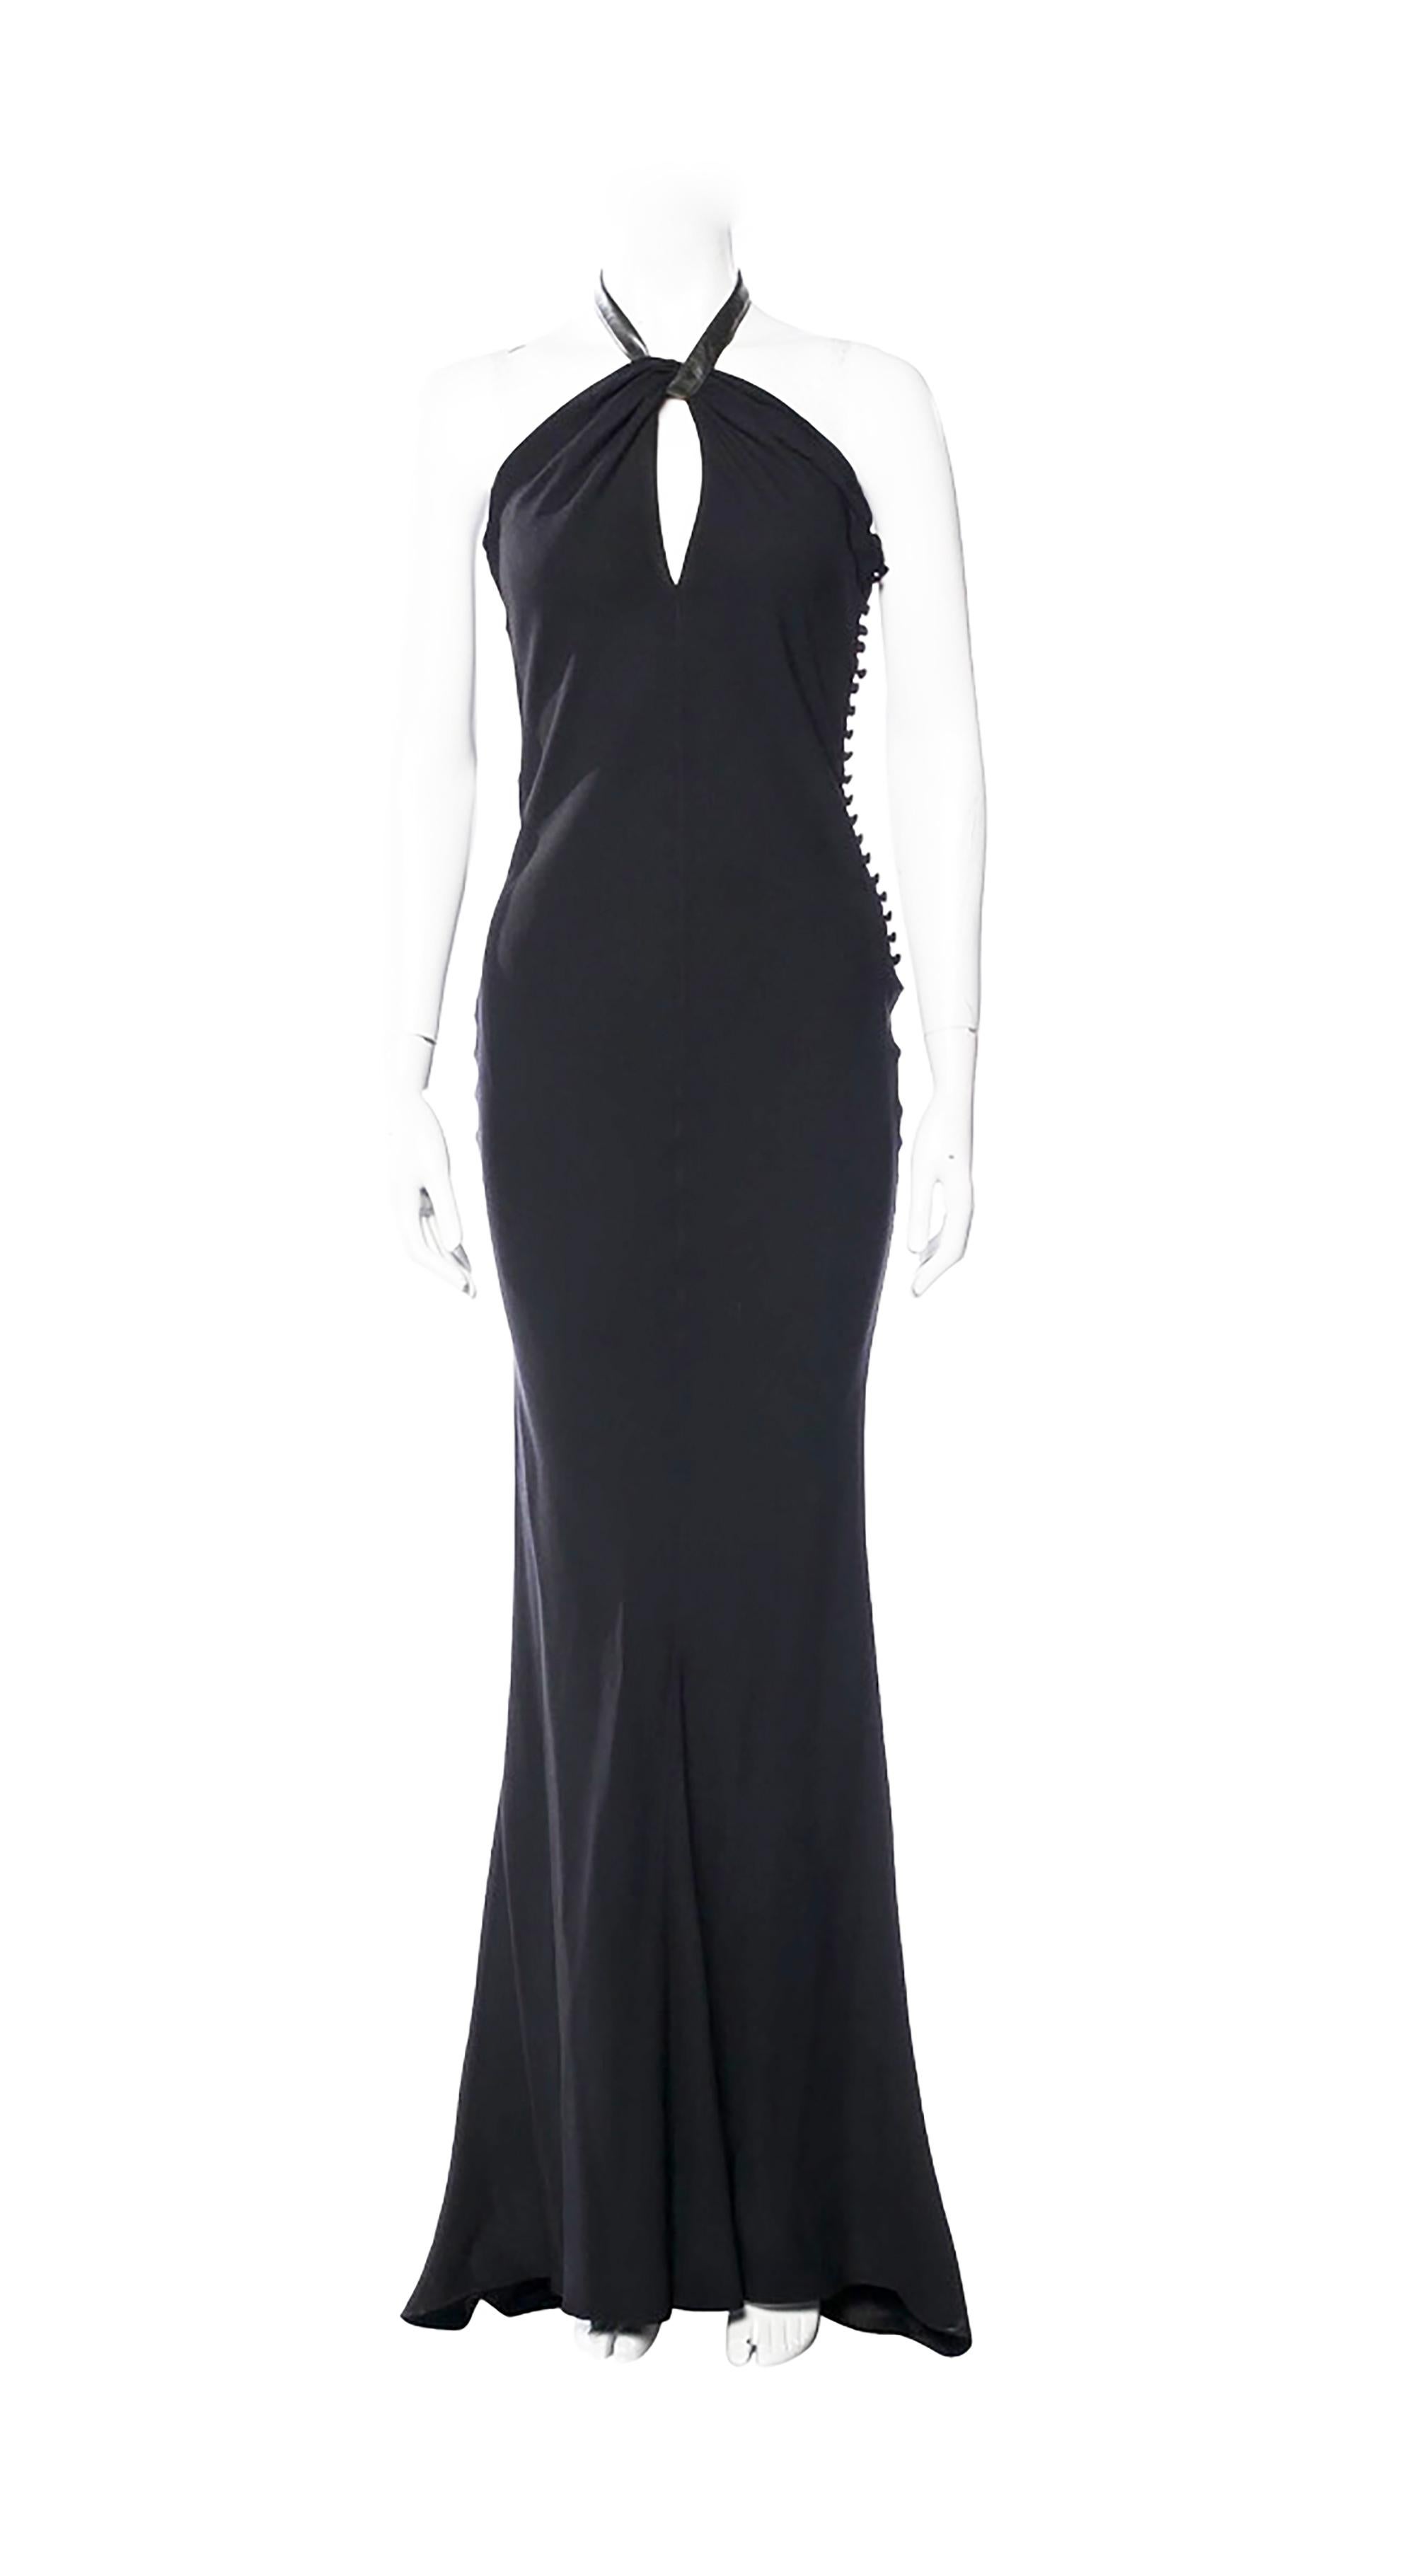 Women's 2001 S/S Christian Dior Black Evening Gown 